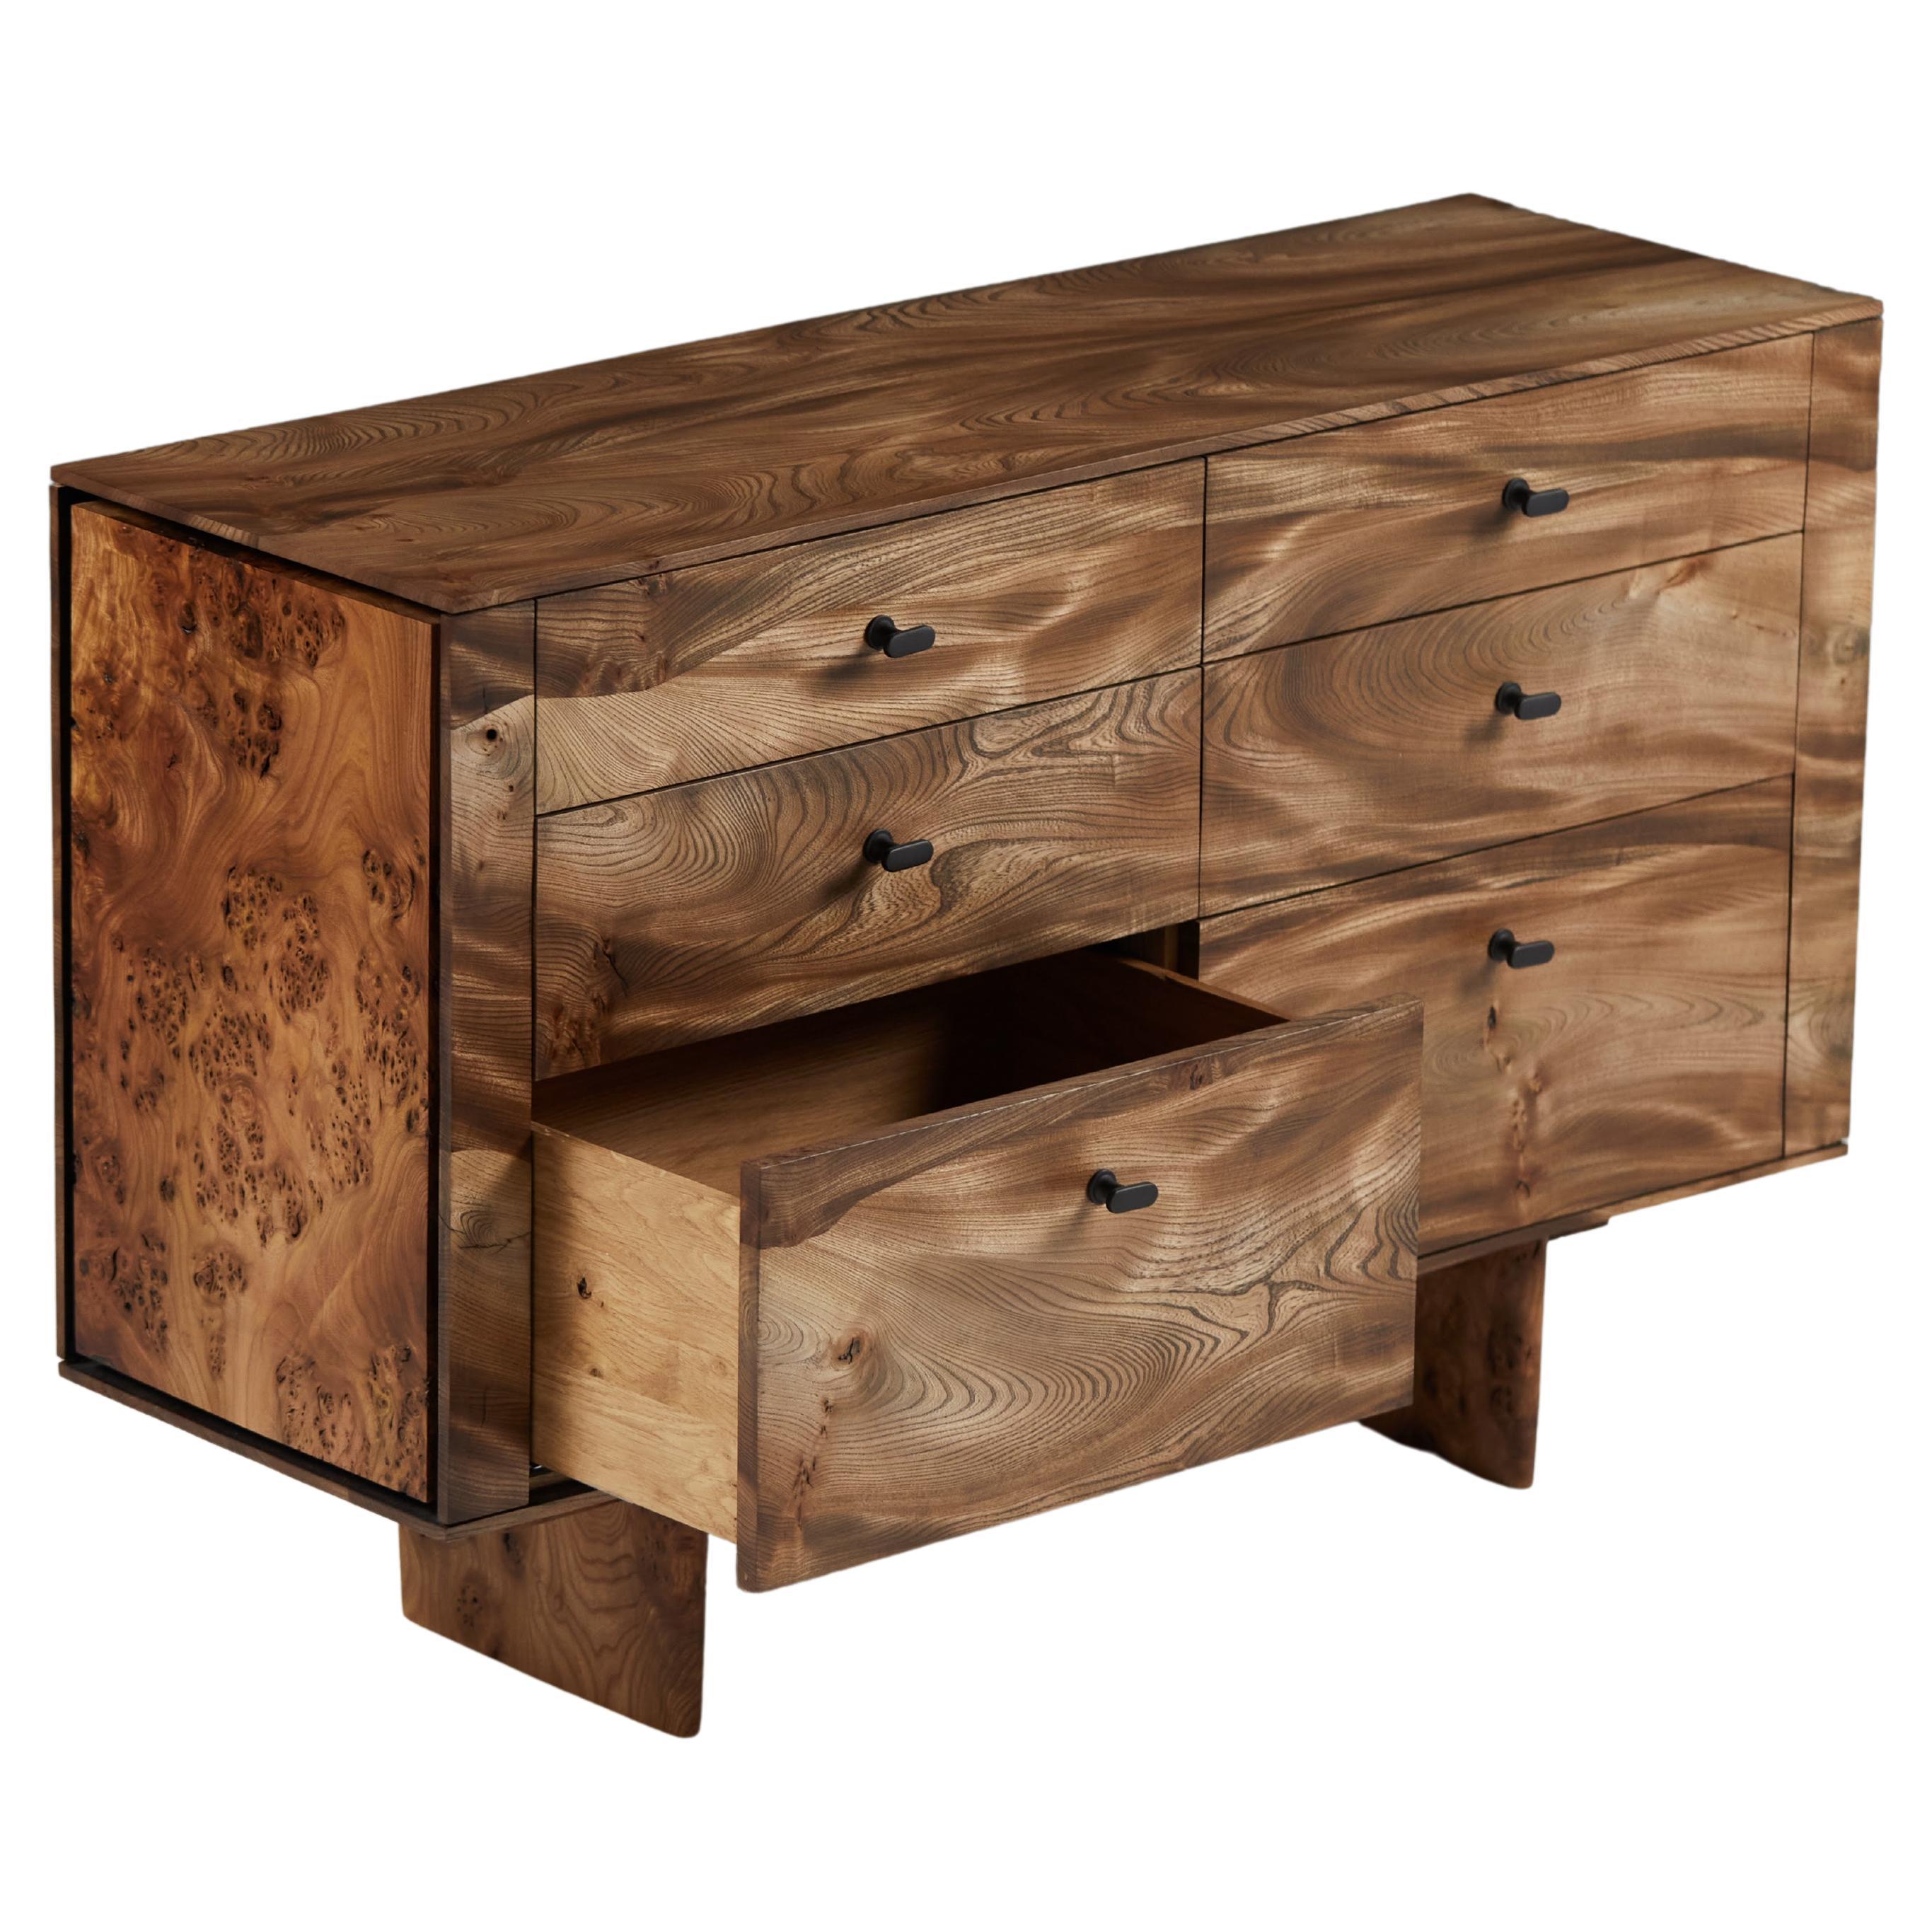 Chest of Drawers in Scottish elm by Jonathan Field. Unique